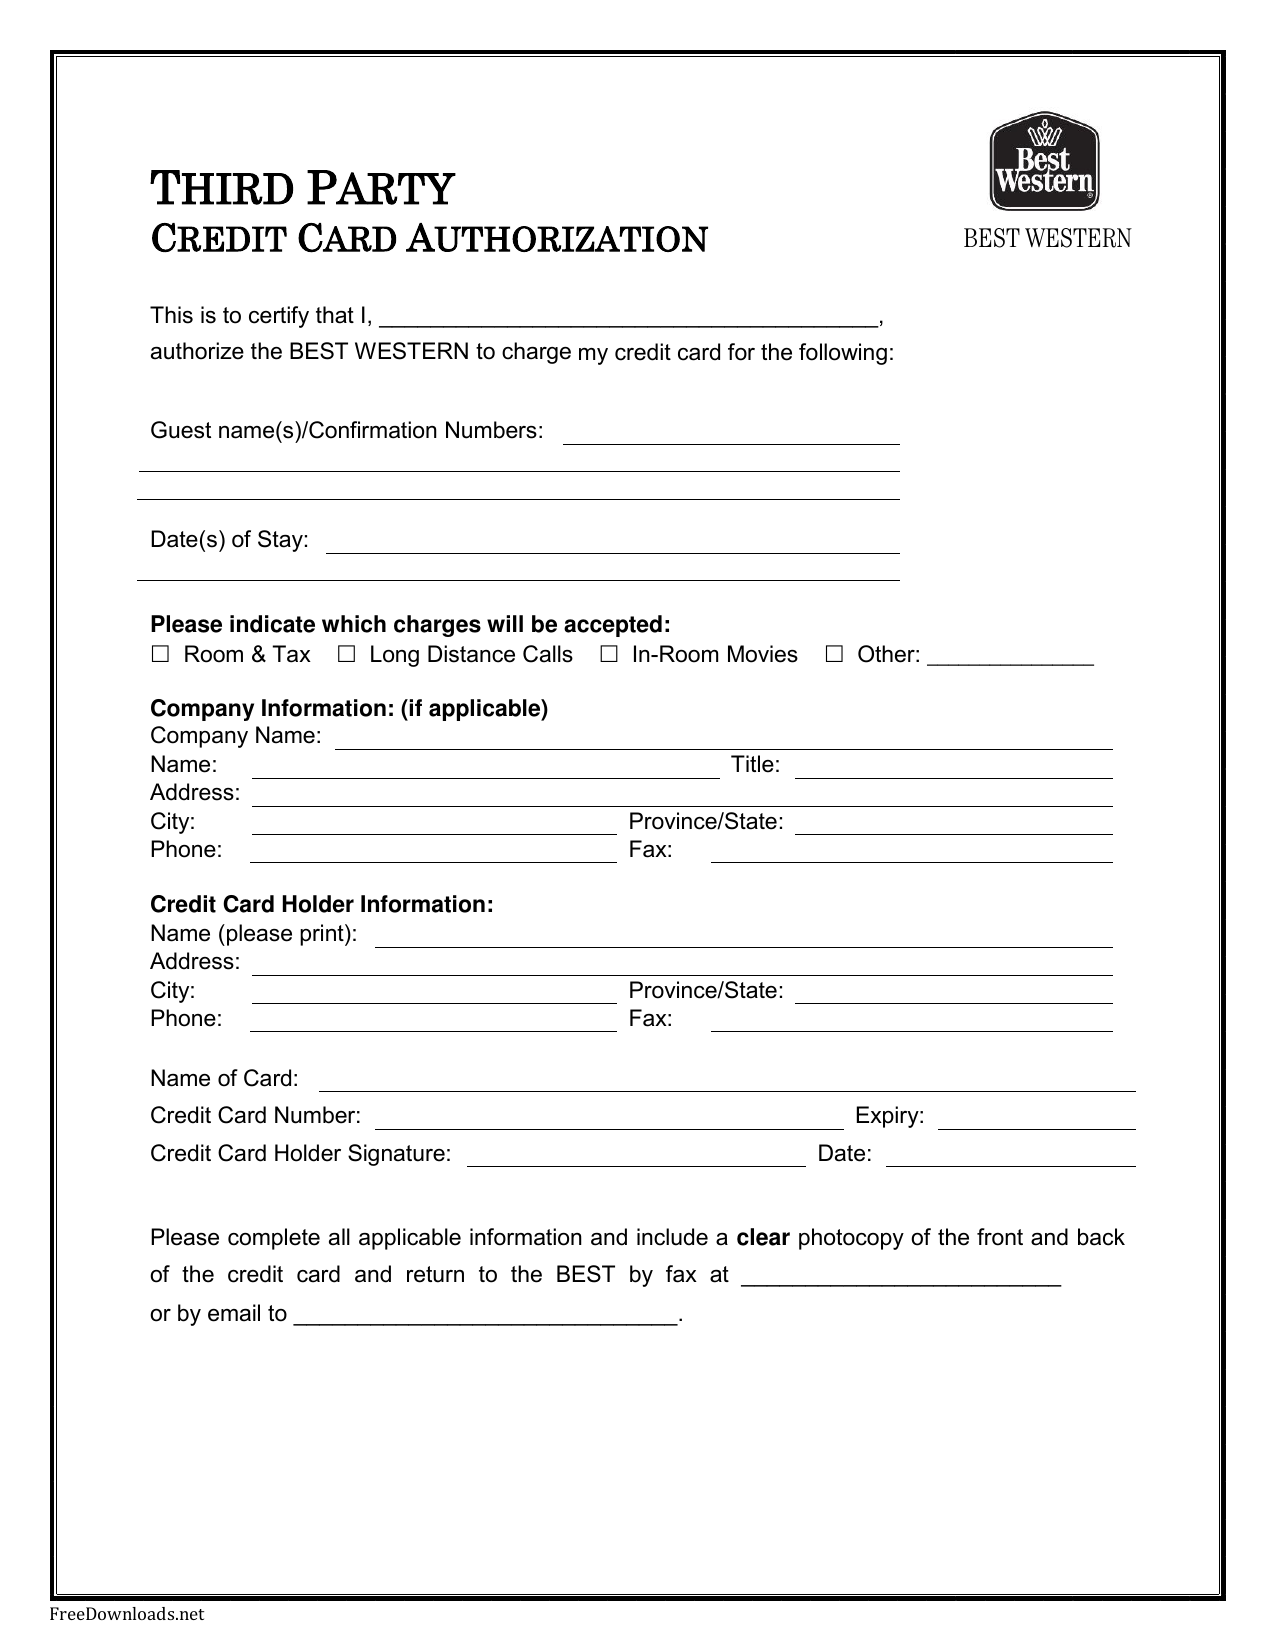 Download Best Western Credit Card Authorization Form Template For Authorization To Charge Credit Card Template